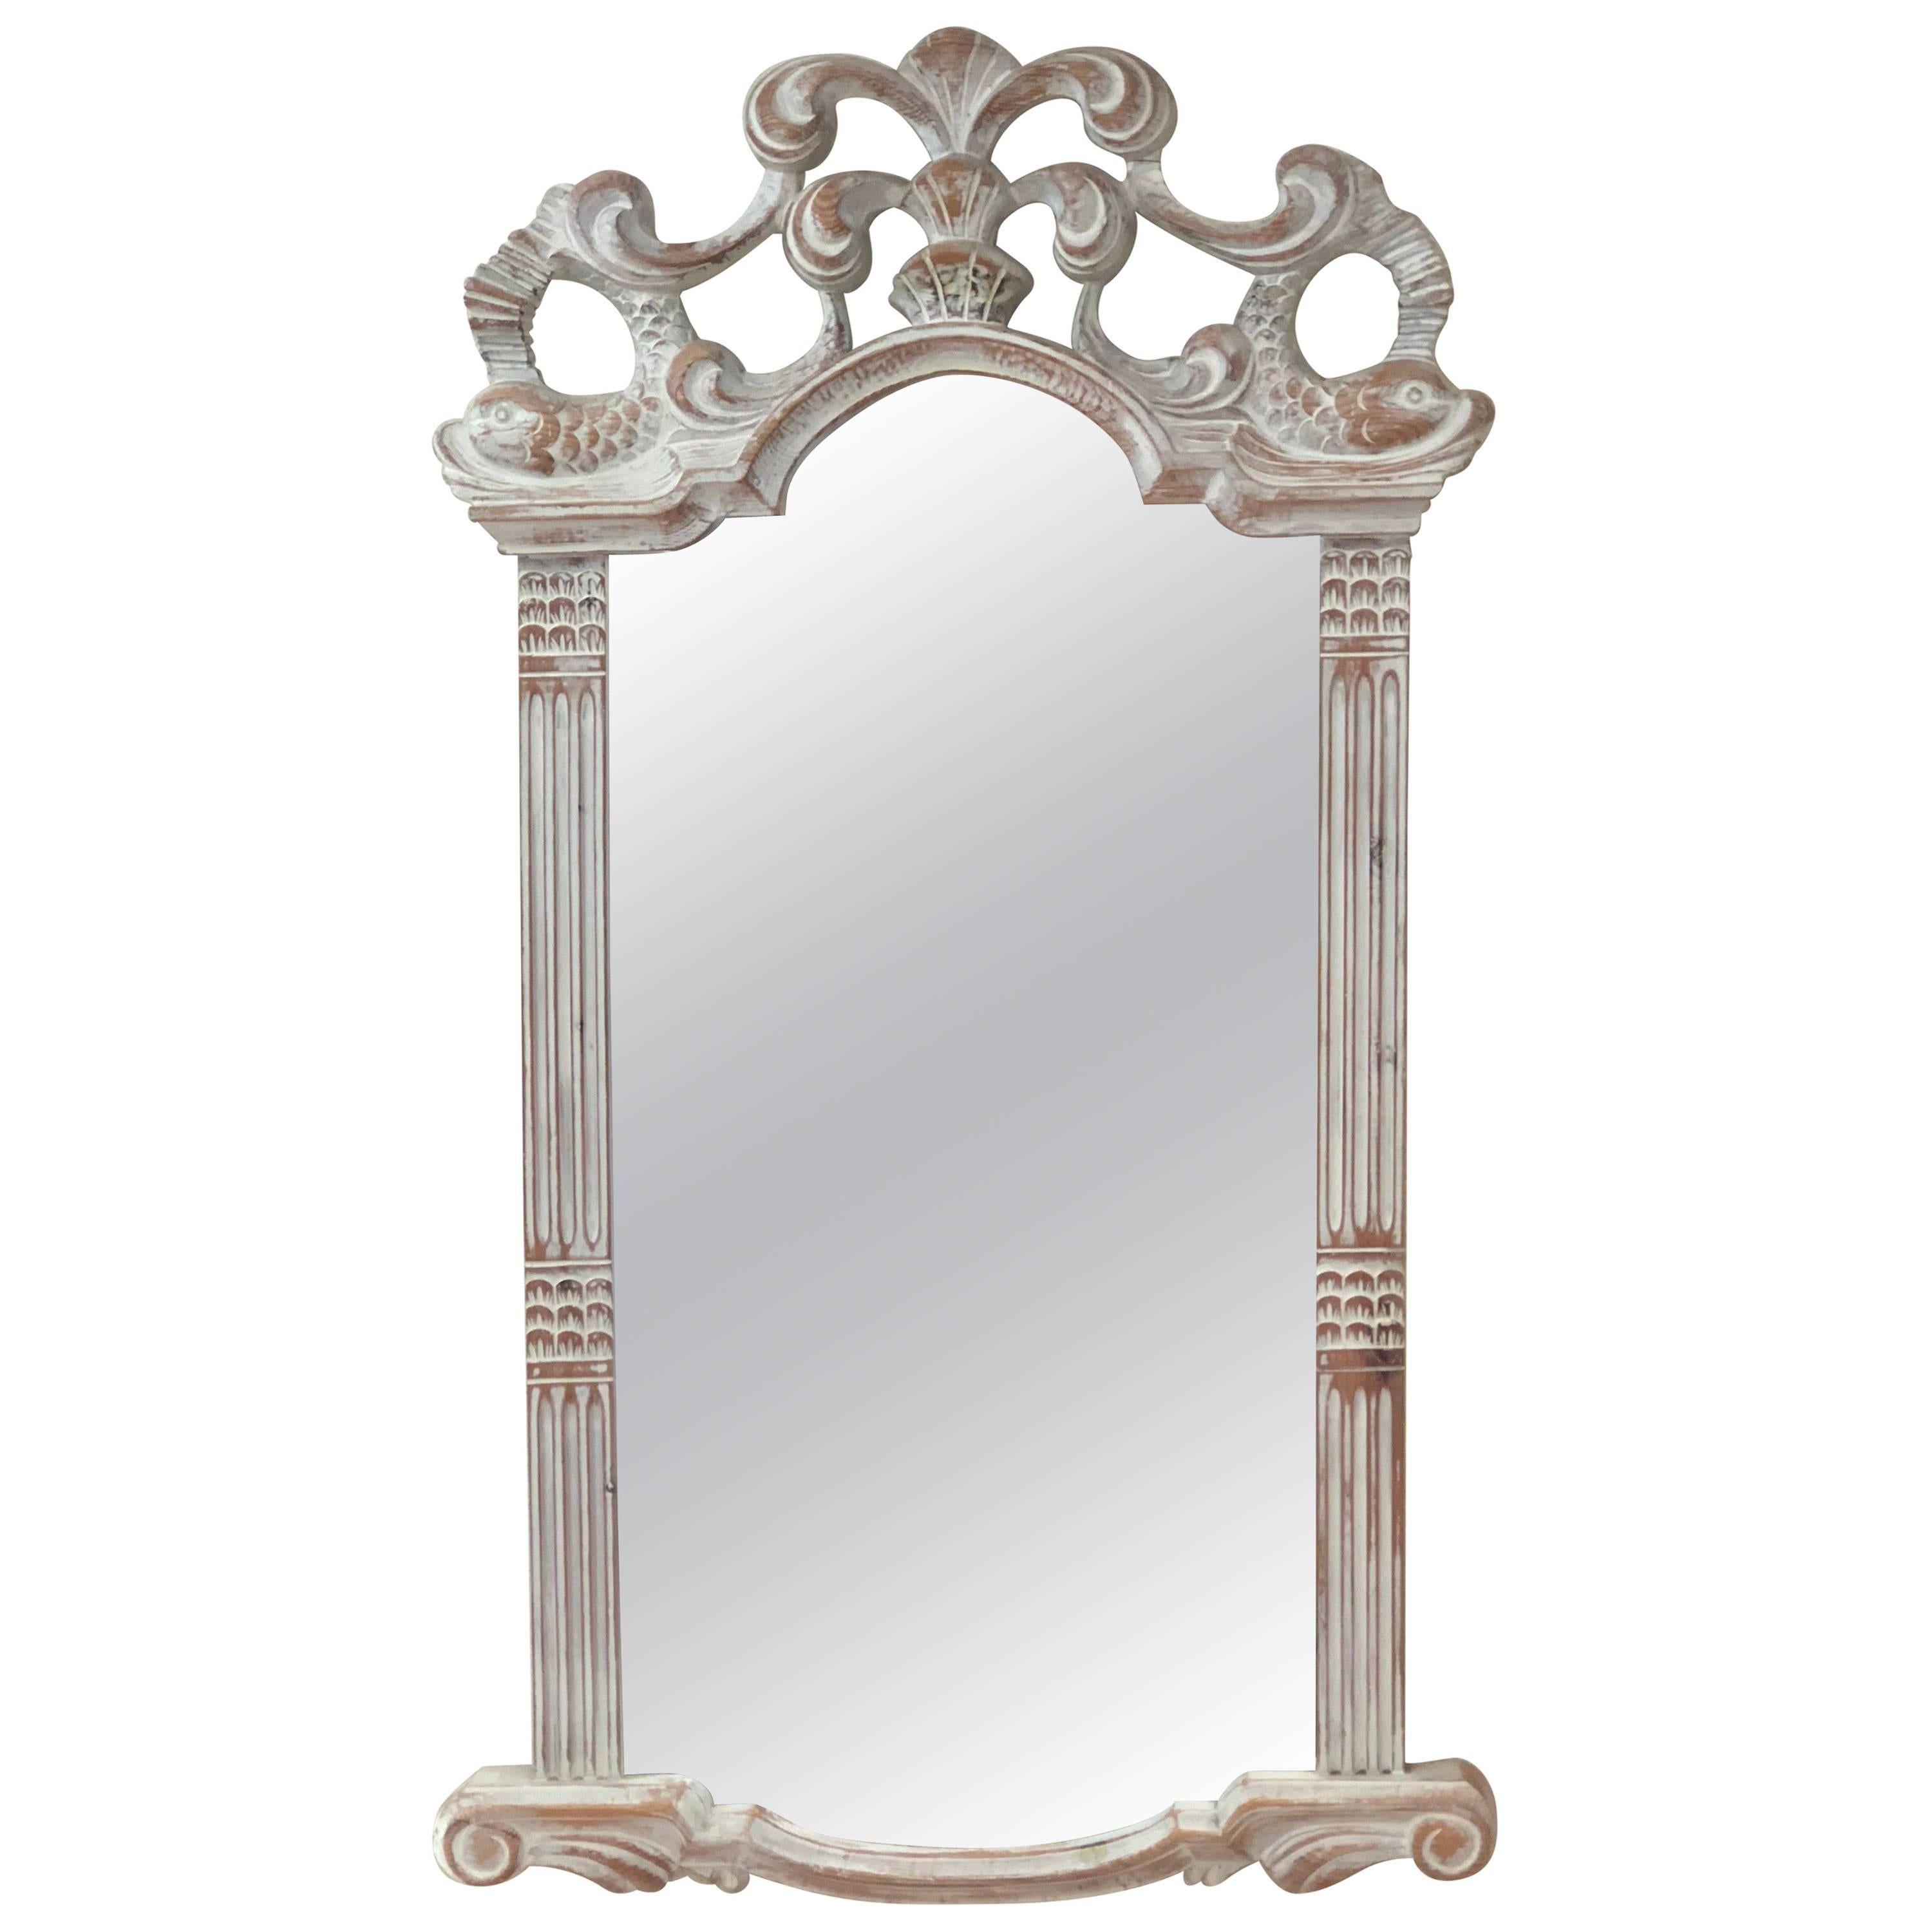 Carved White-Washed Wooden Mirror from Spain